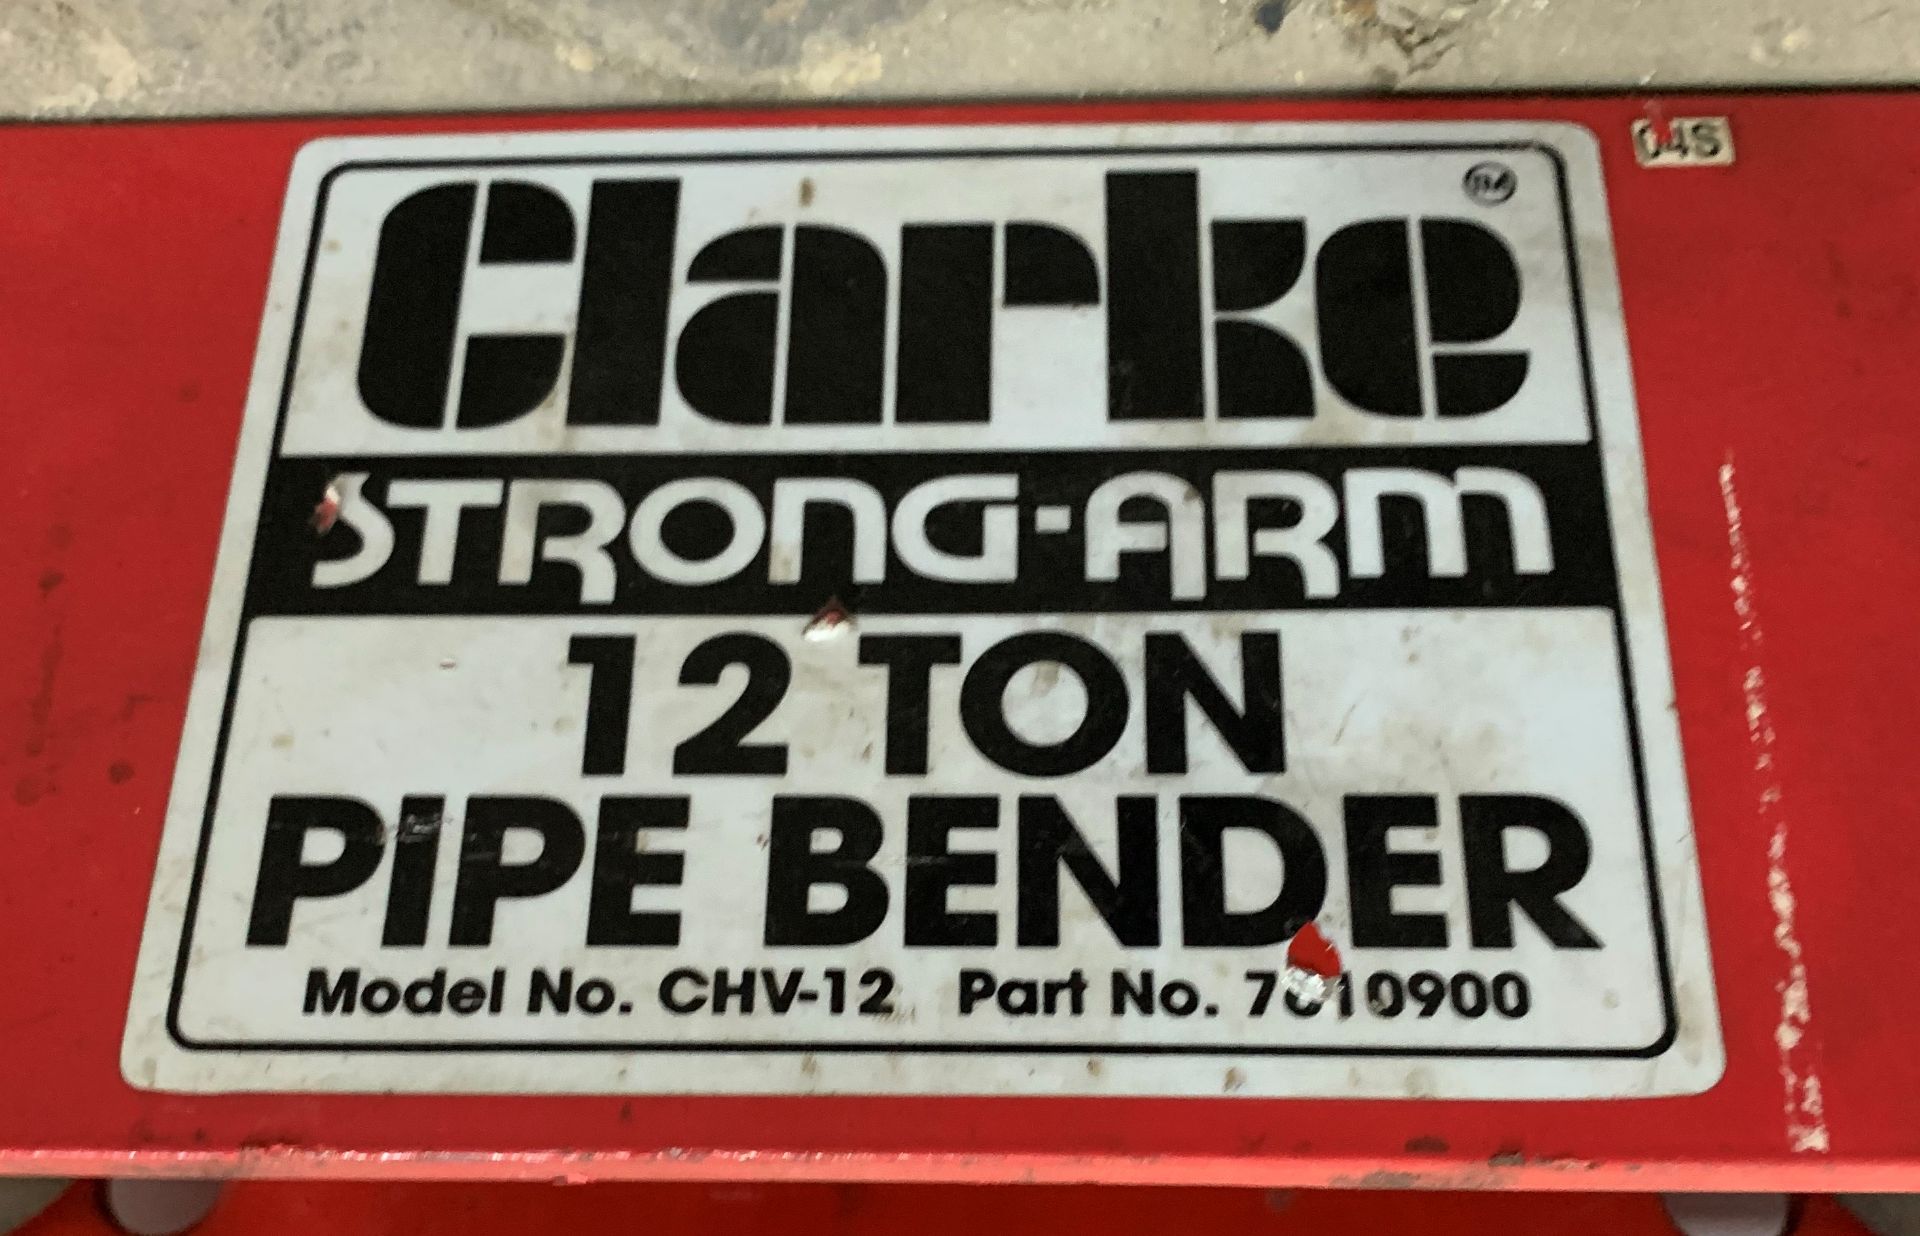 Clarke CHV-12 Strong-Arm 12 Ton Pipe Bender - Image 2 of 3